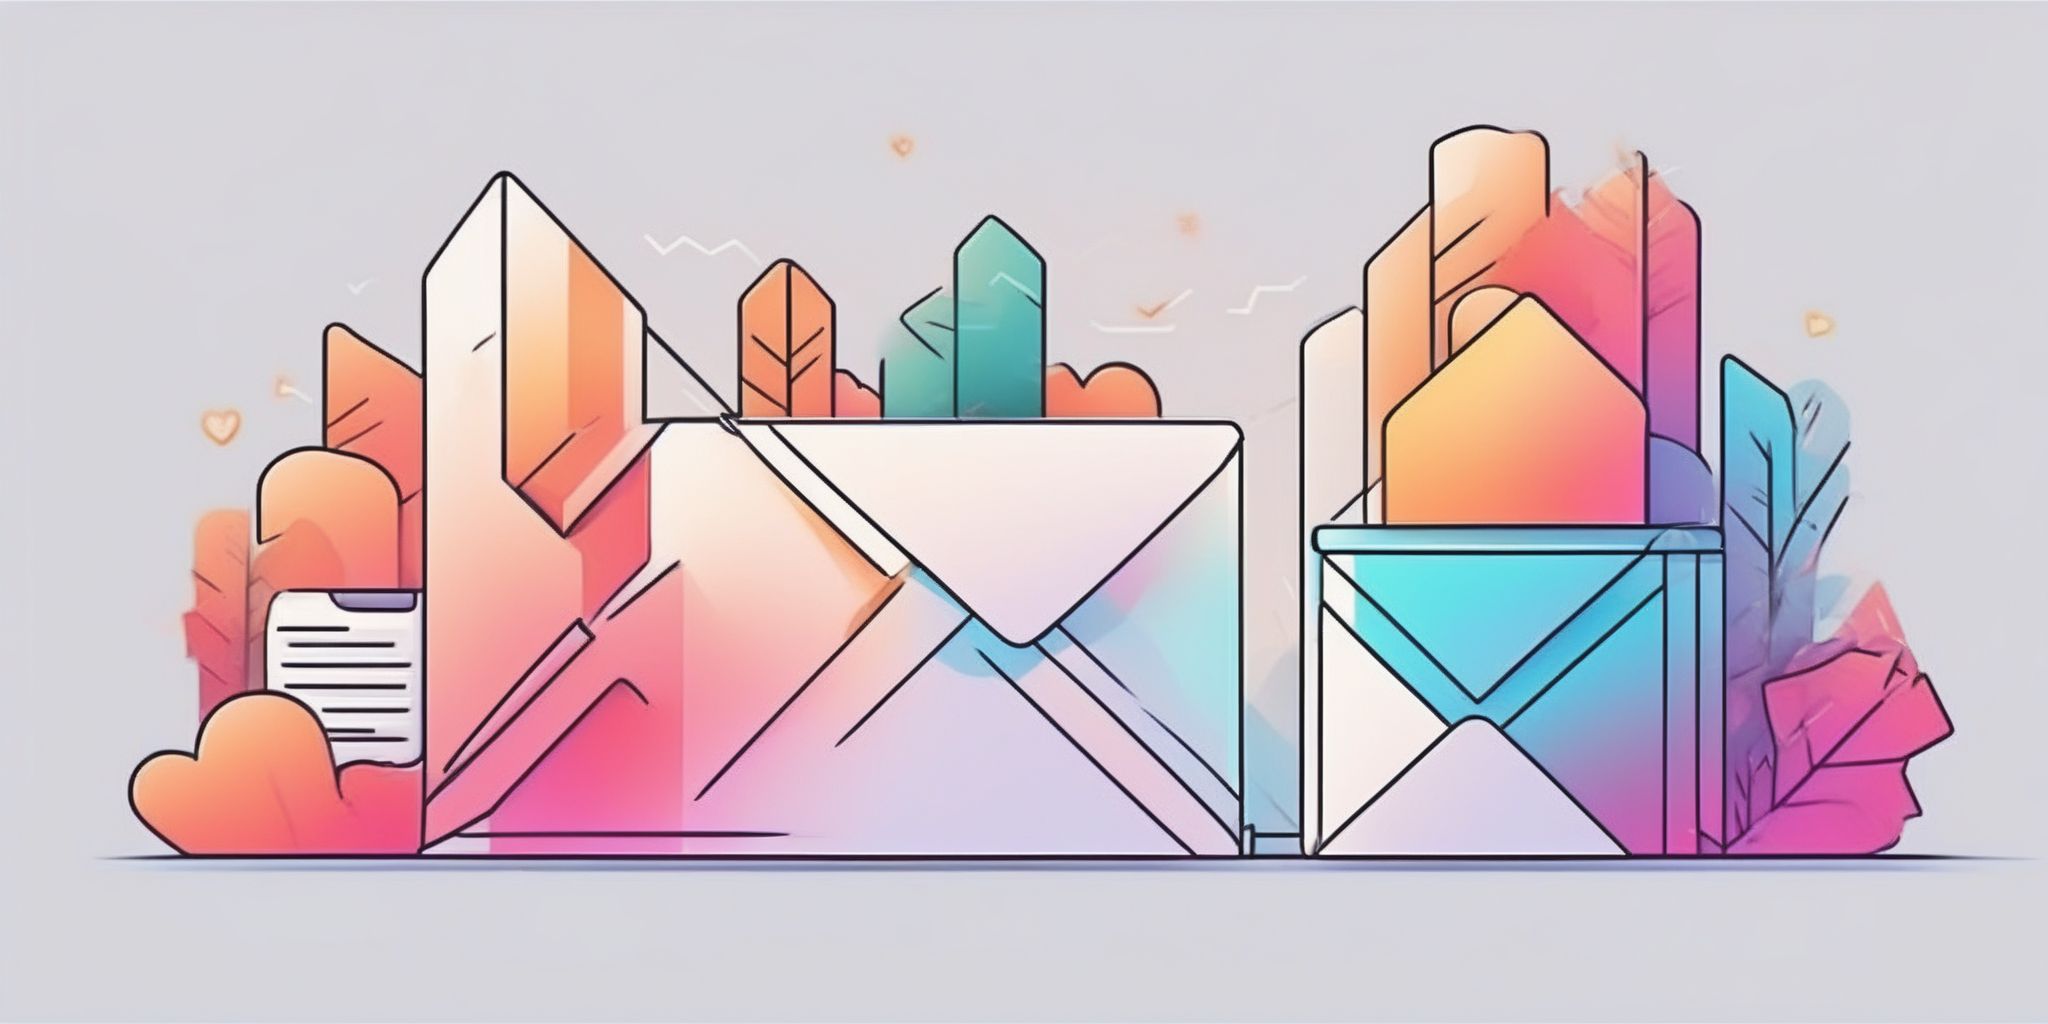 Inbox in illustration style with gradients and white background